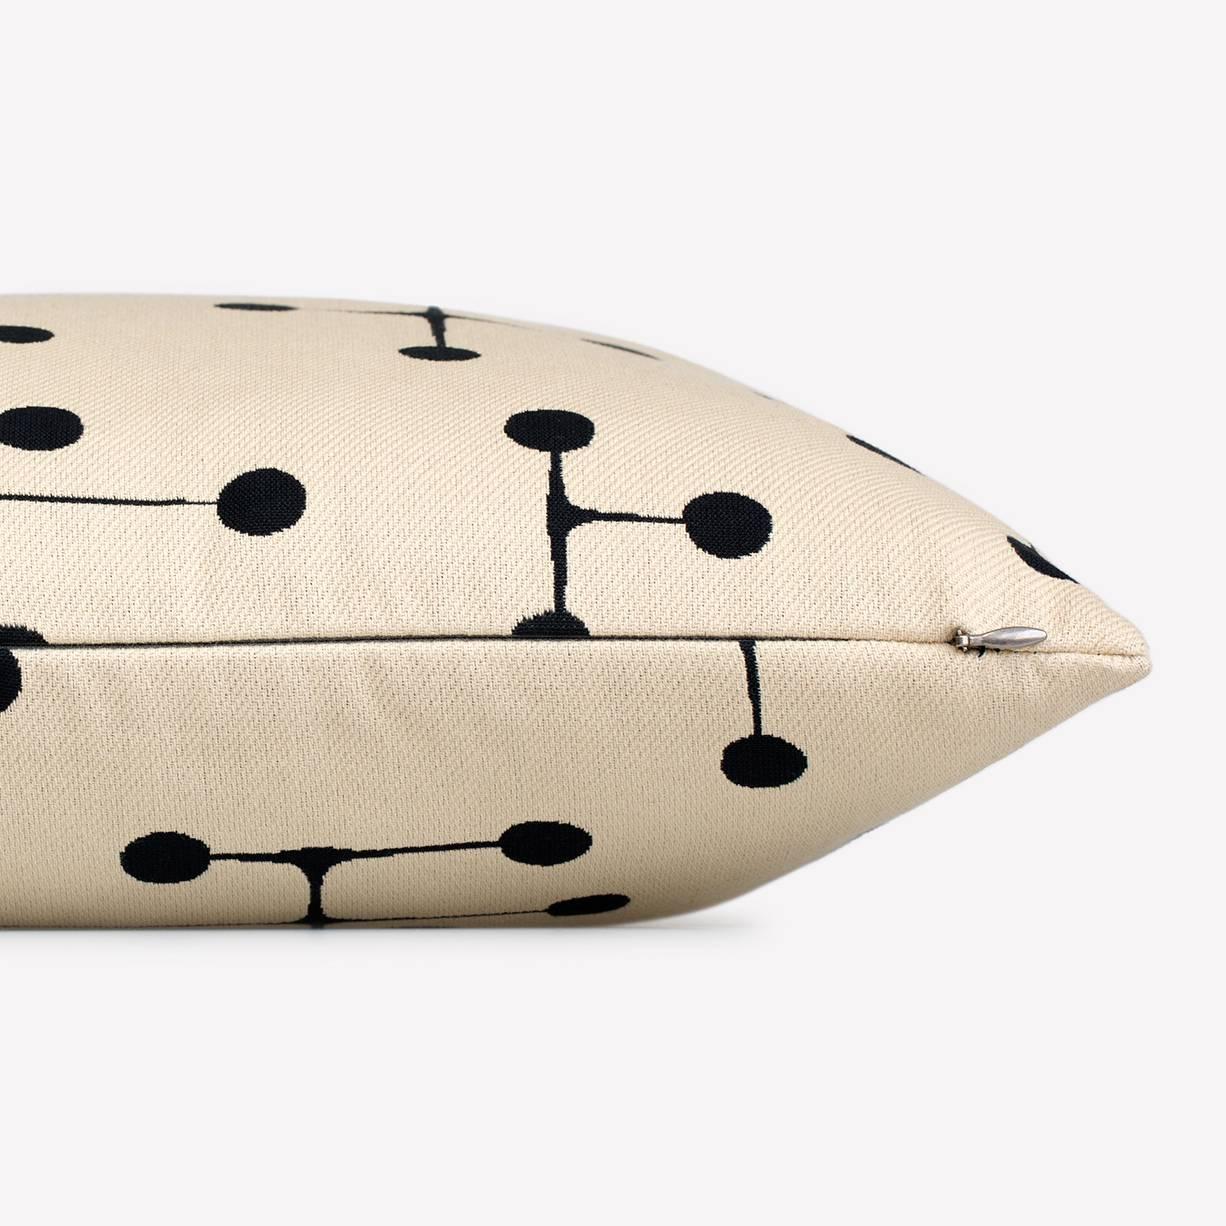 Maharam Pillow
Dot Pattern by Charles & Ray Eames 
001 Document

Dot Pattern was originally designed by Ray Eames for the Museum of Modern Art's 1947 